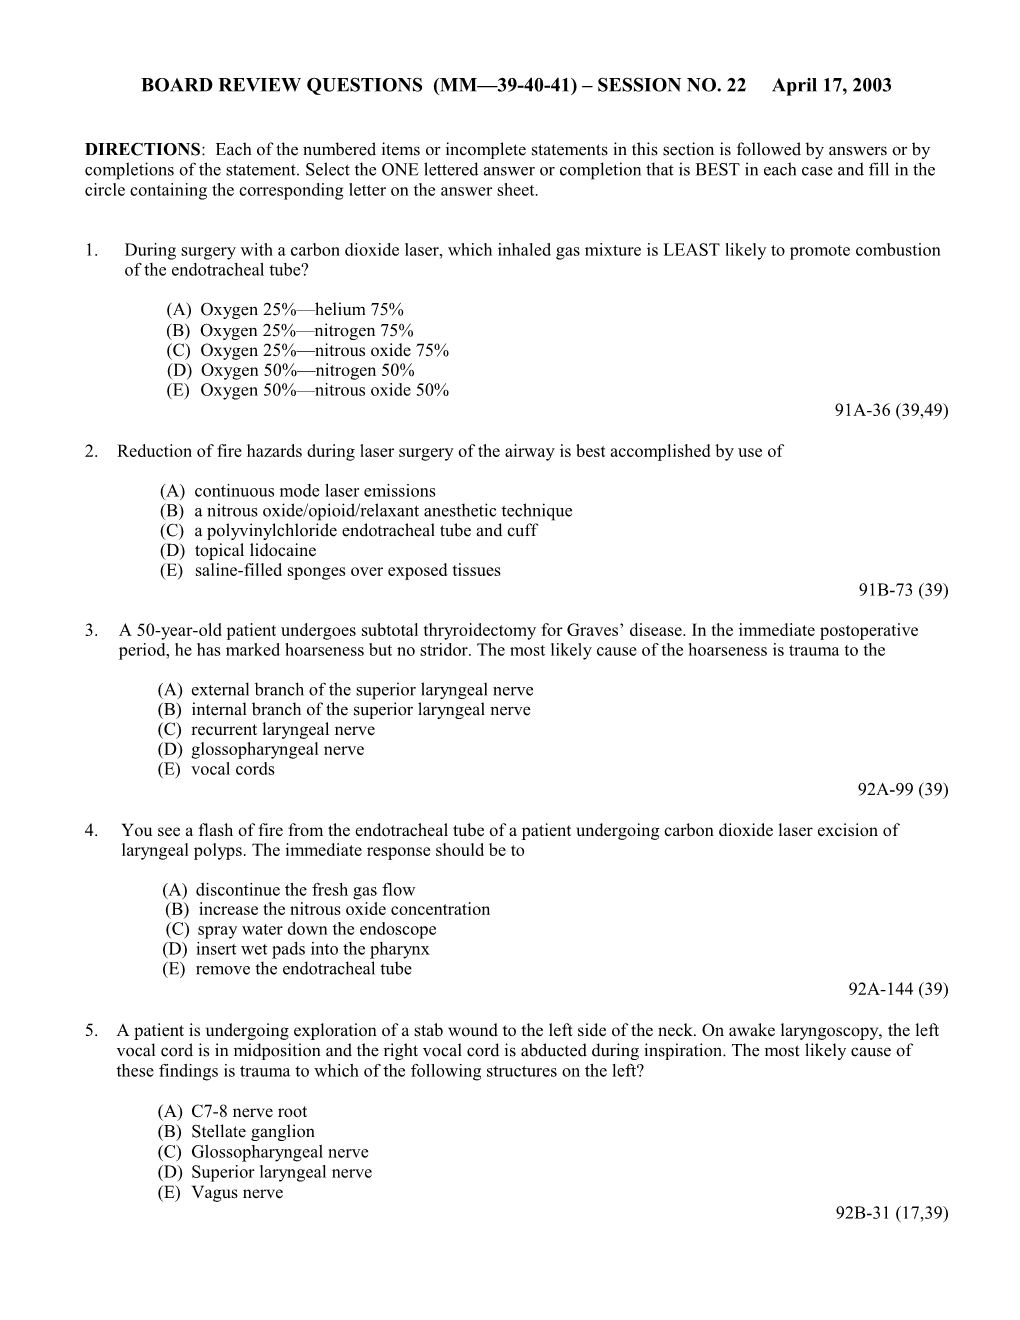 Board Review Questions (Mm 36-37-38) Session No